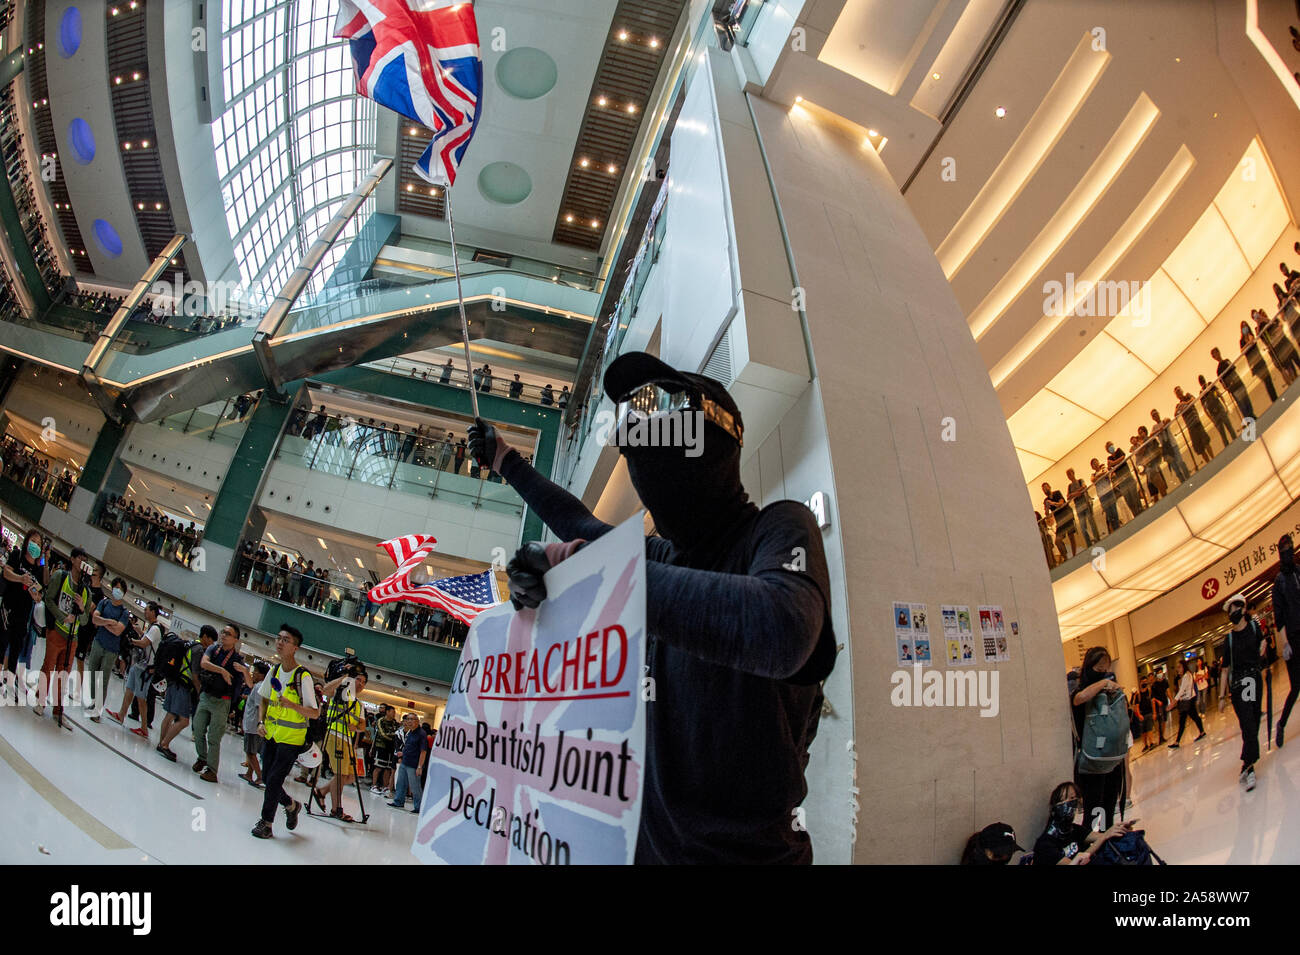 Hong Kong protestors wave British and American flags in protest in a shopping mall in Hong Kong before violence erupts Stock Photo